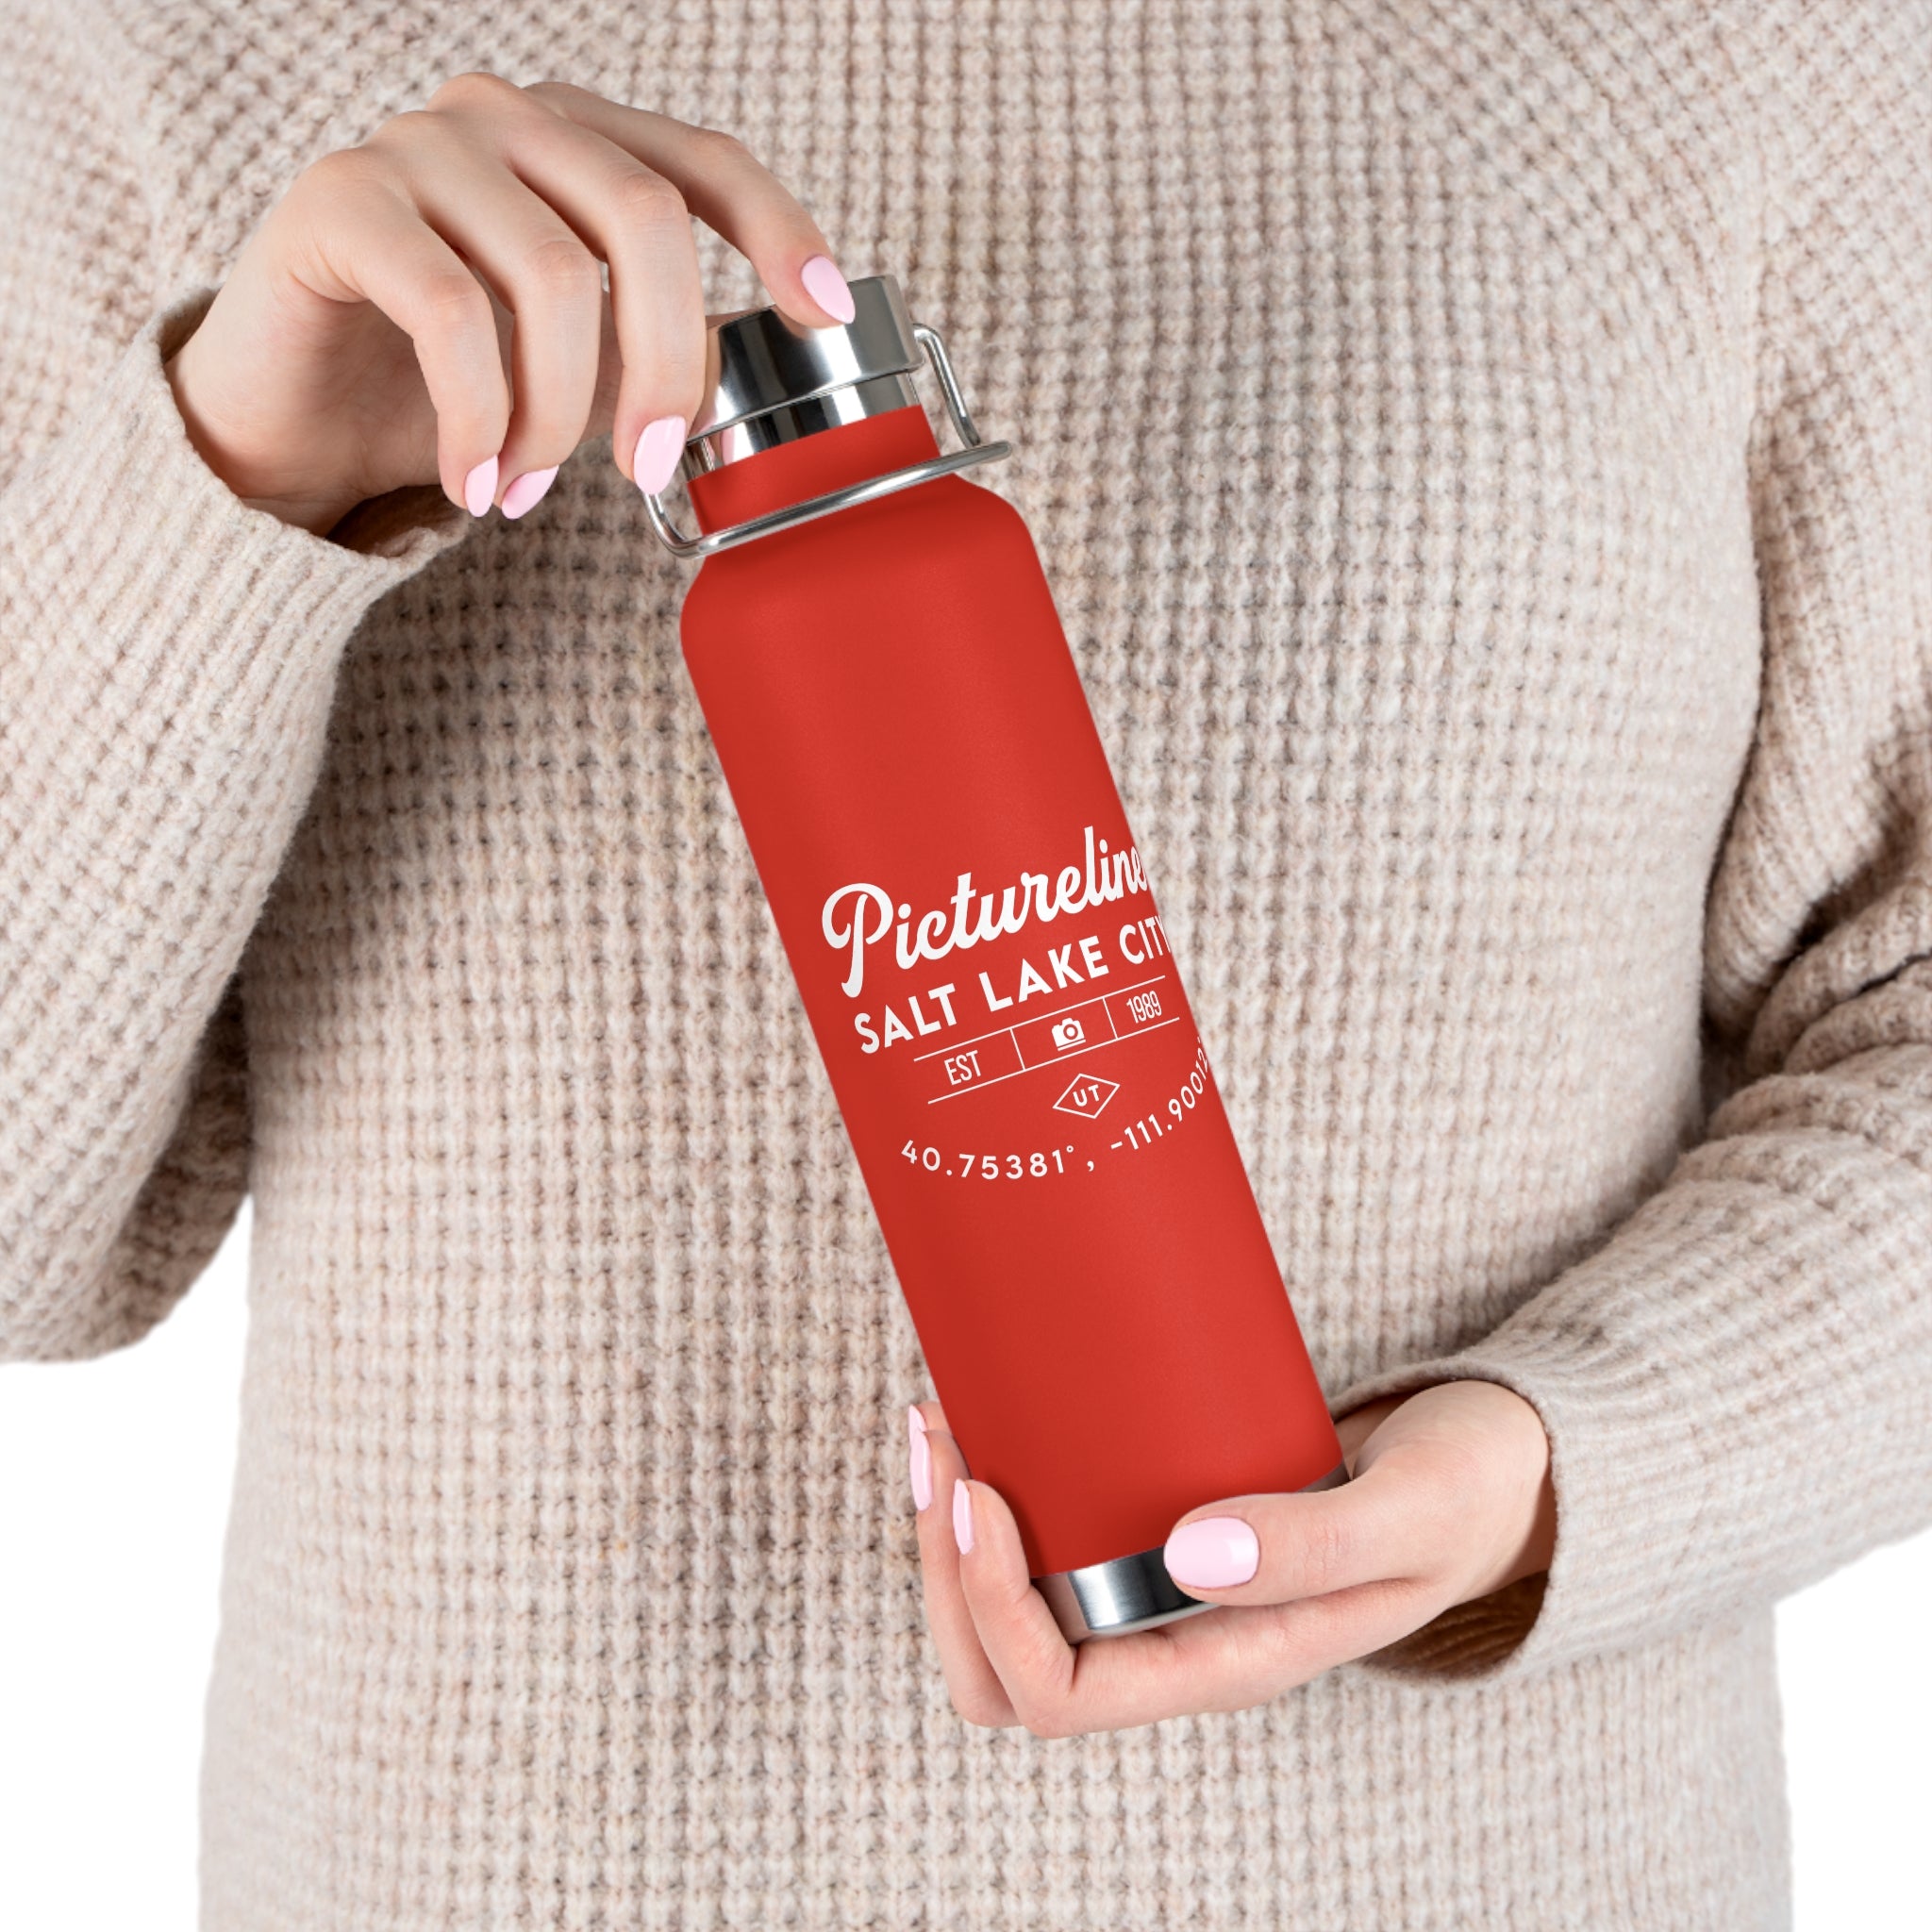 Old School Pictureline Insulated Bottle, 22oz